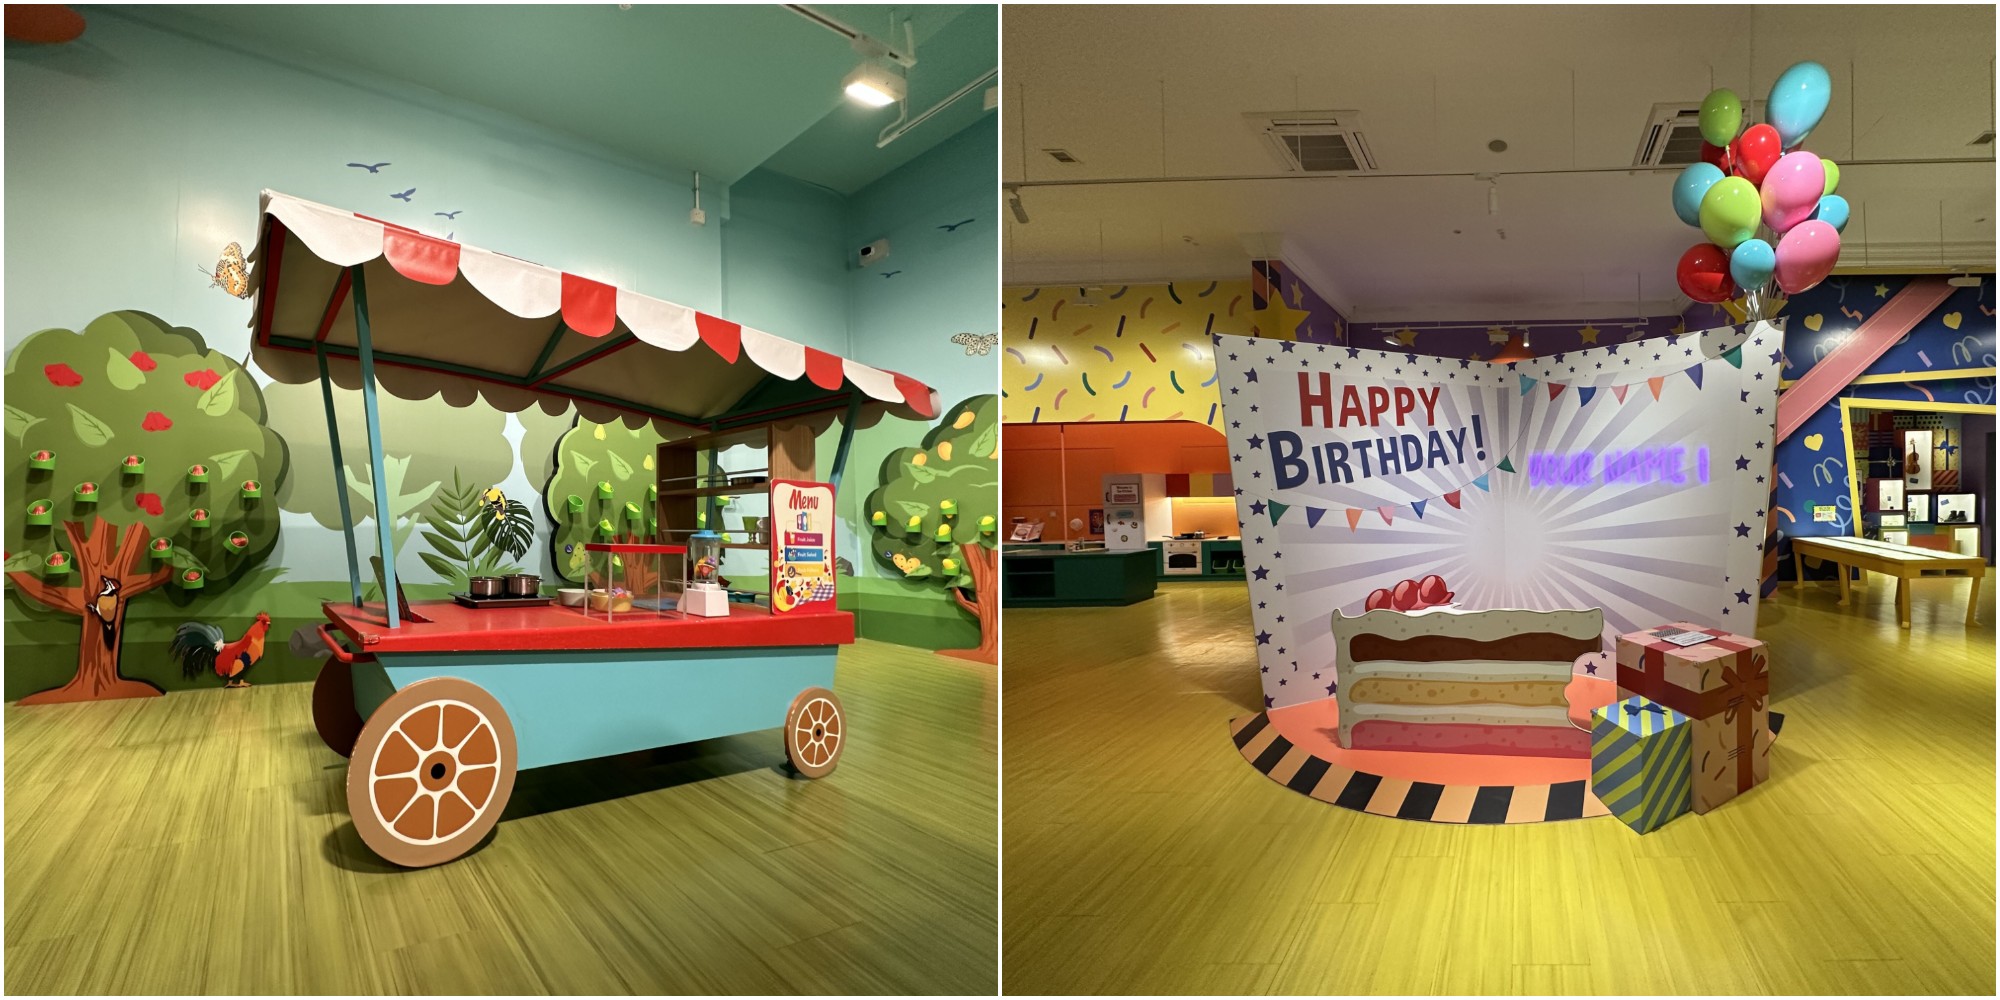   Left: Mid shot of a cart in Play Pod. Right: Wide shot of Happy Birthday exhibition